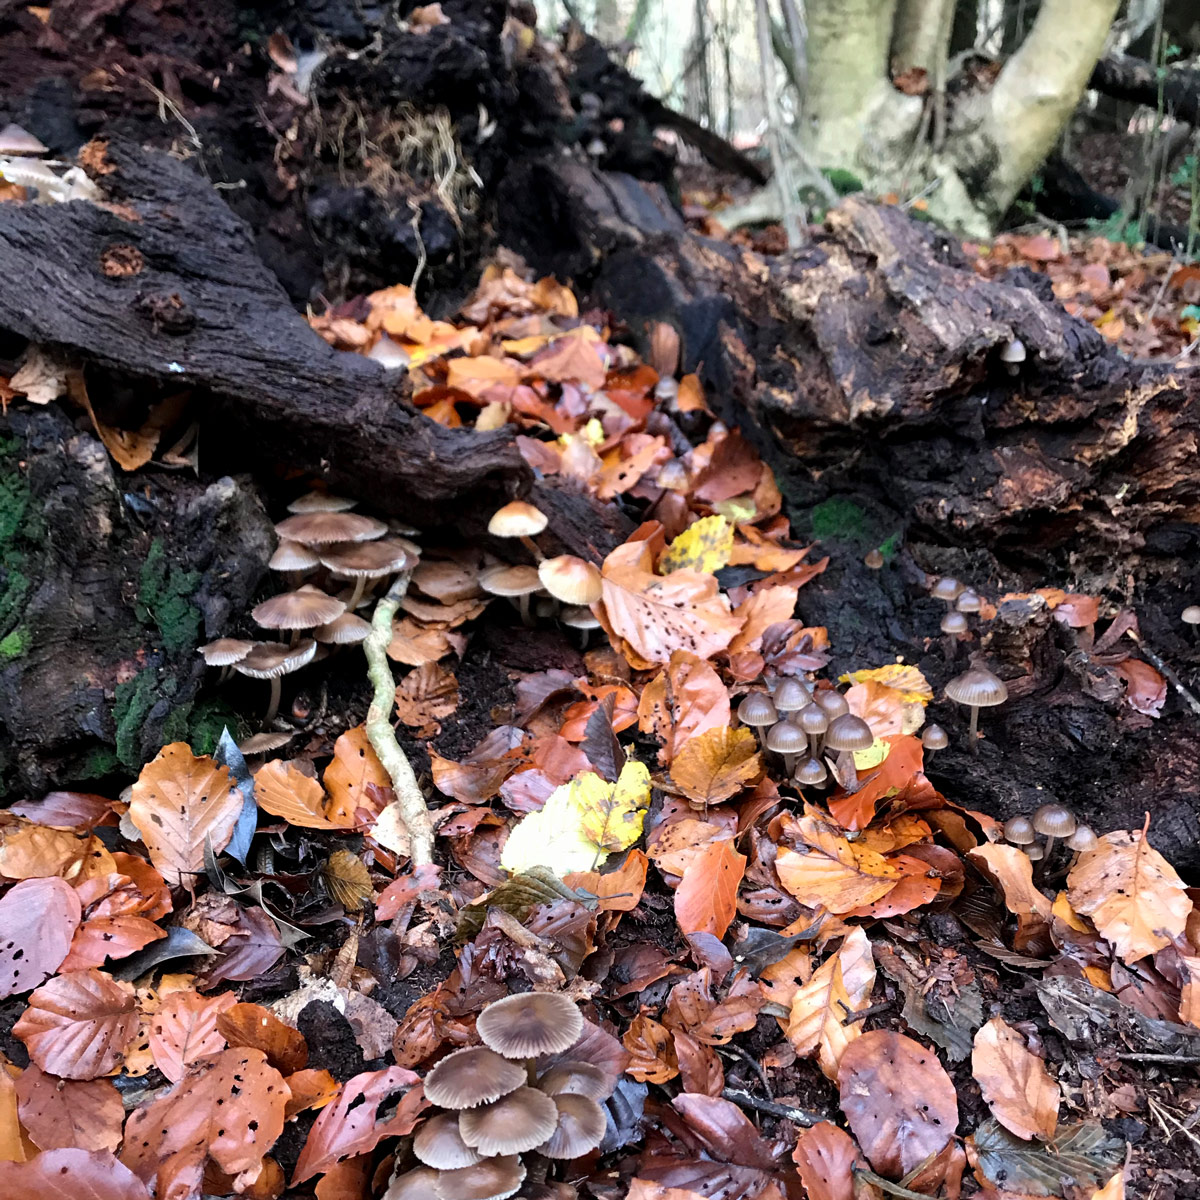 Lots of different types of mushrooms growing amongst Autumn leaves